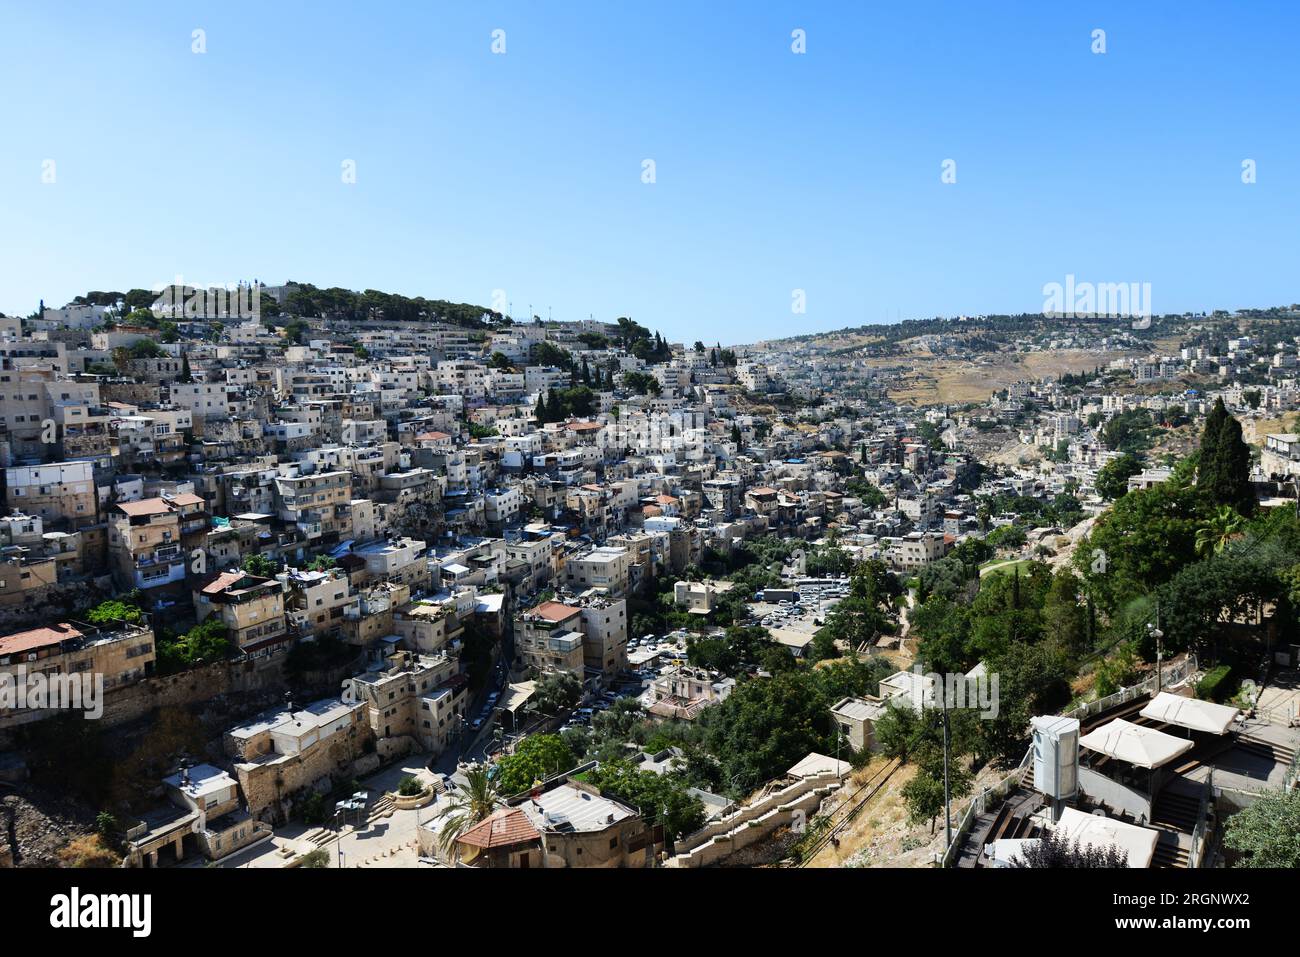 A view of the Palestinian neighborhood of Ras al-Amud in East Jerusalem from the City of David archeological site. Stock Photo